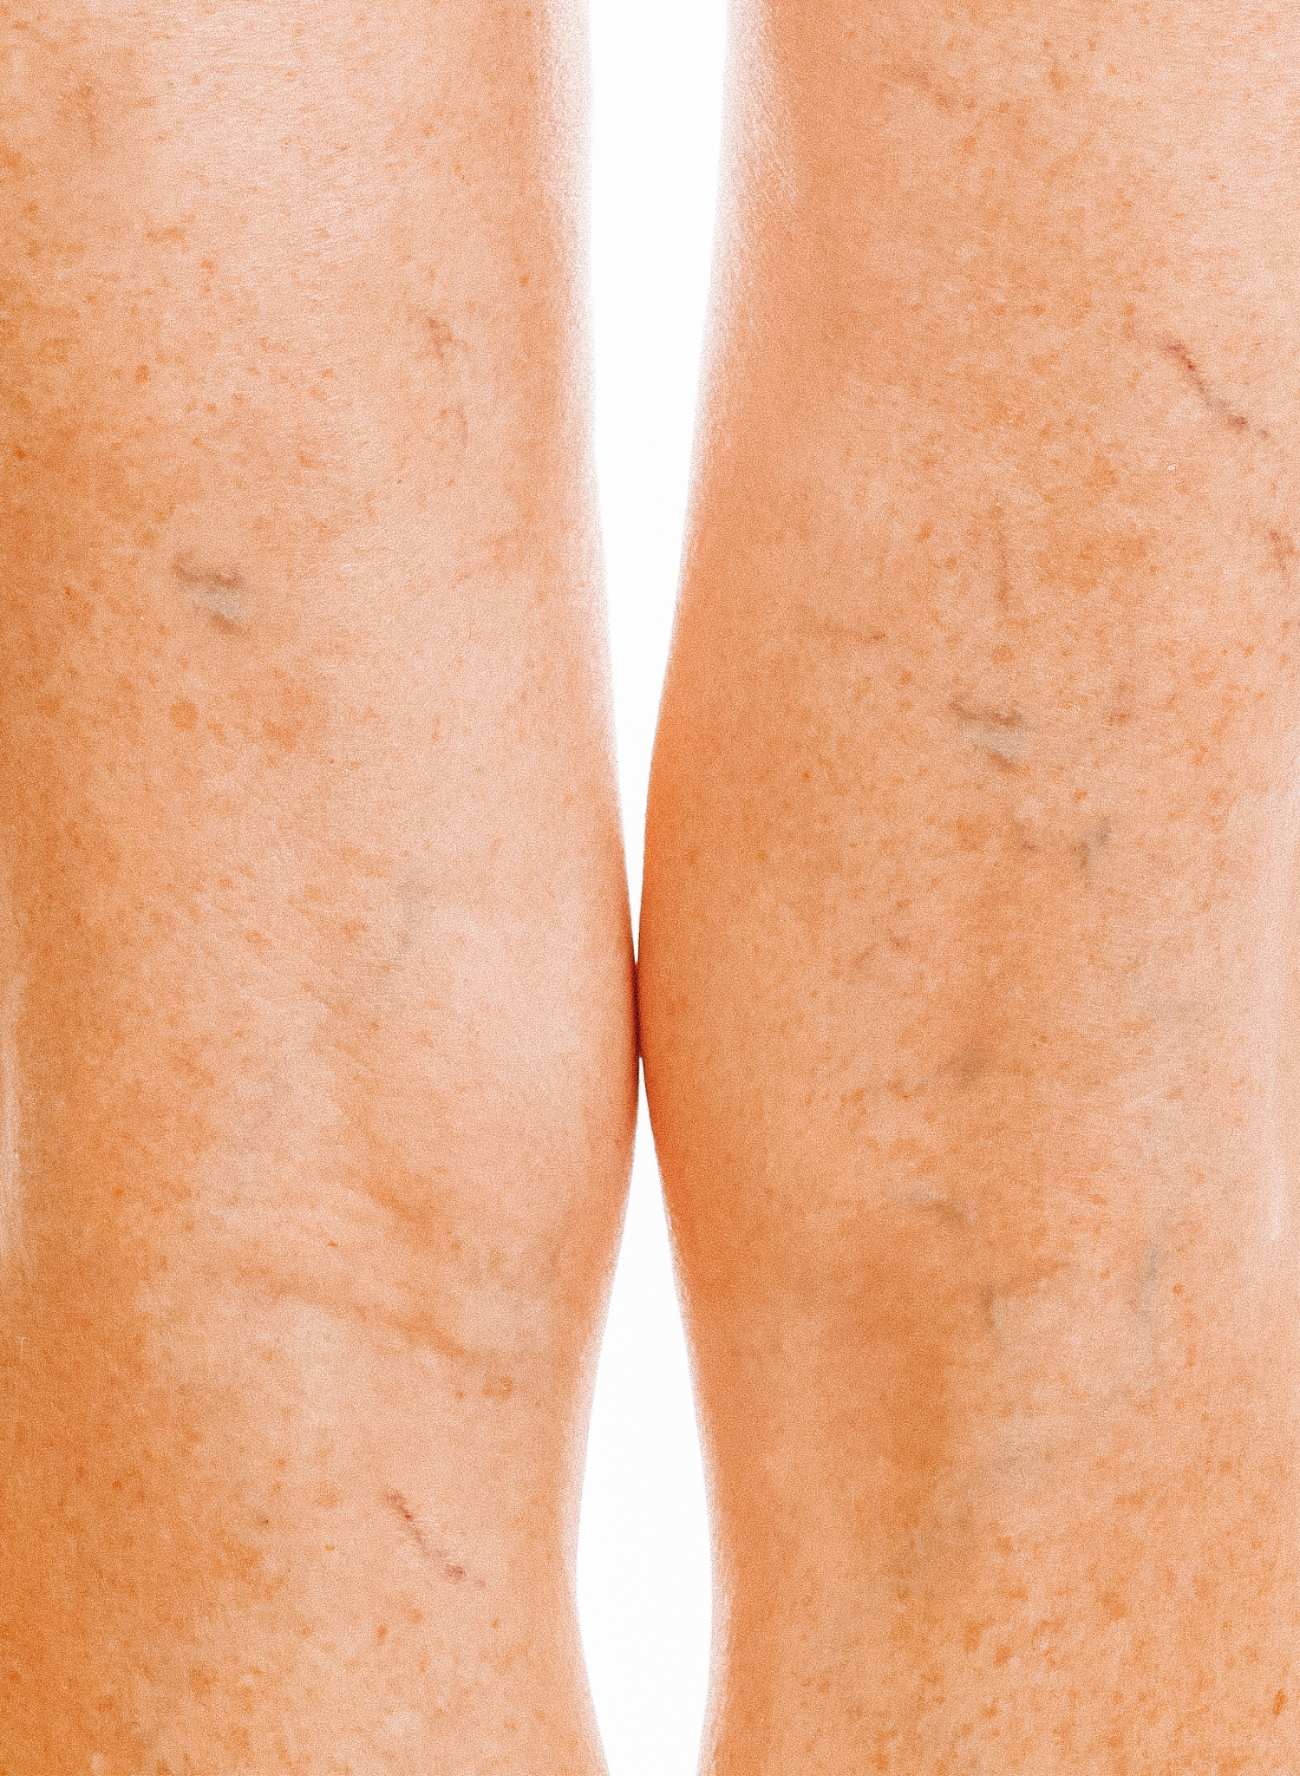 SCLEROTHERAPY